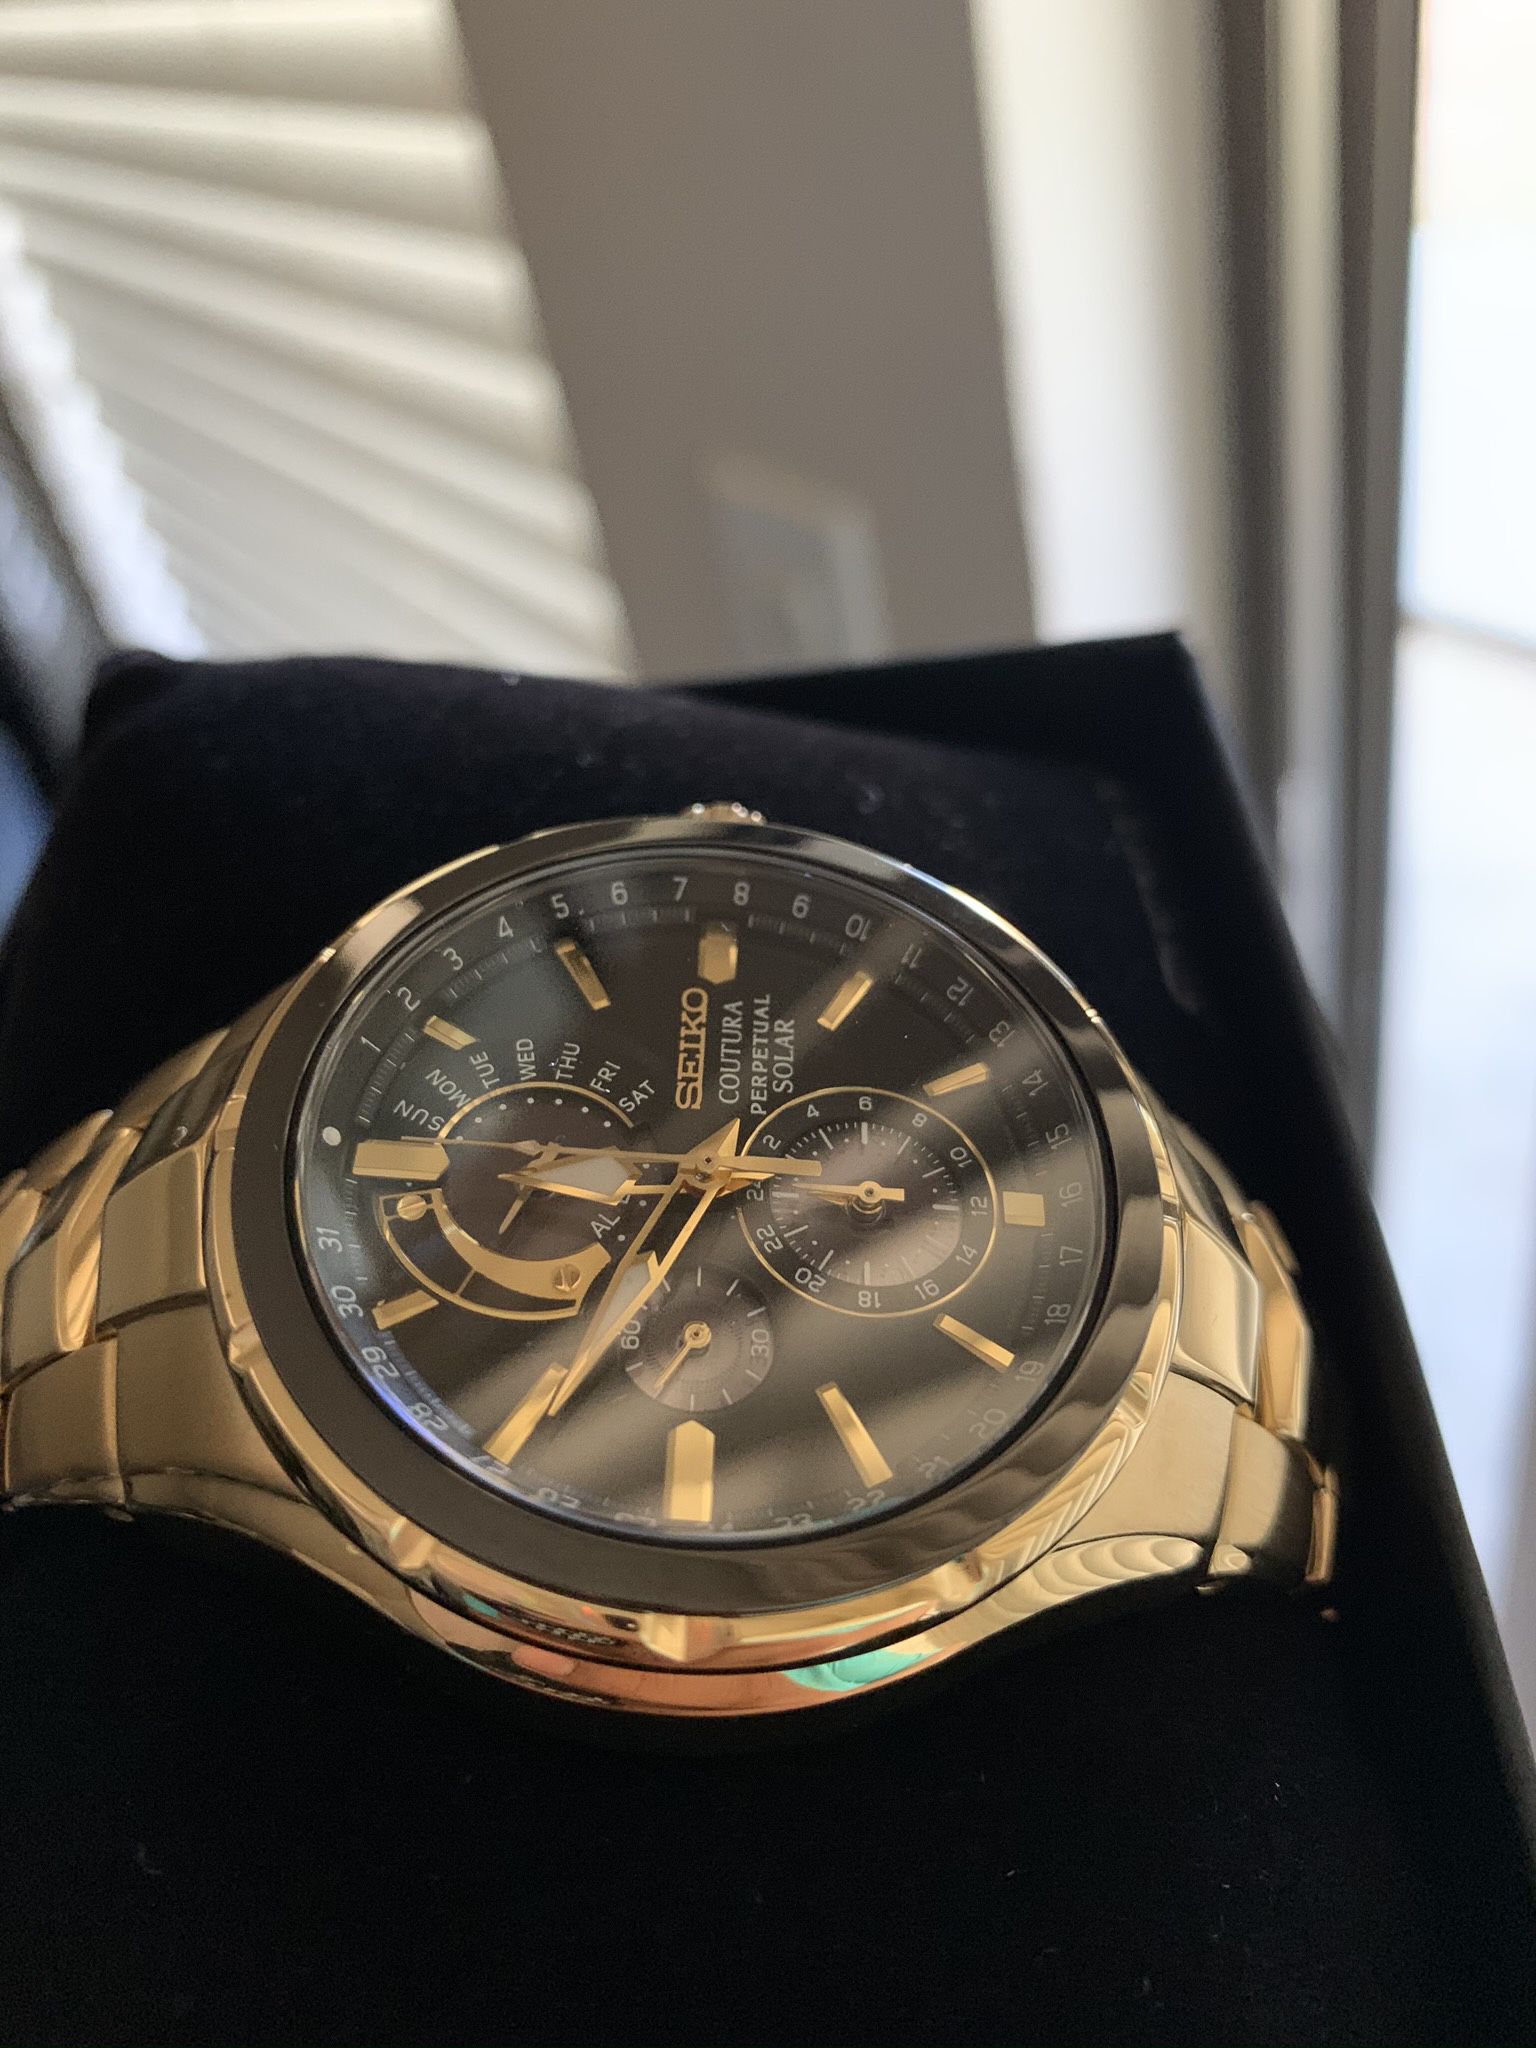 Seiko Coutura Perpetual Solar Gold Watch for Sale in Bellevue, WA - OfferUp